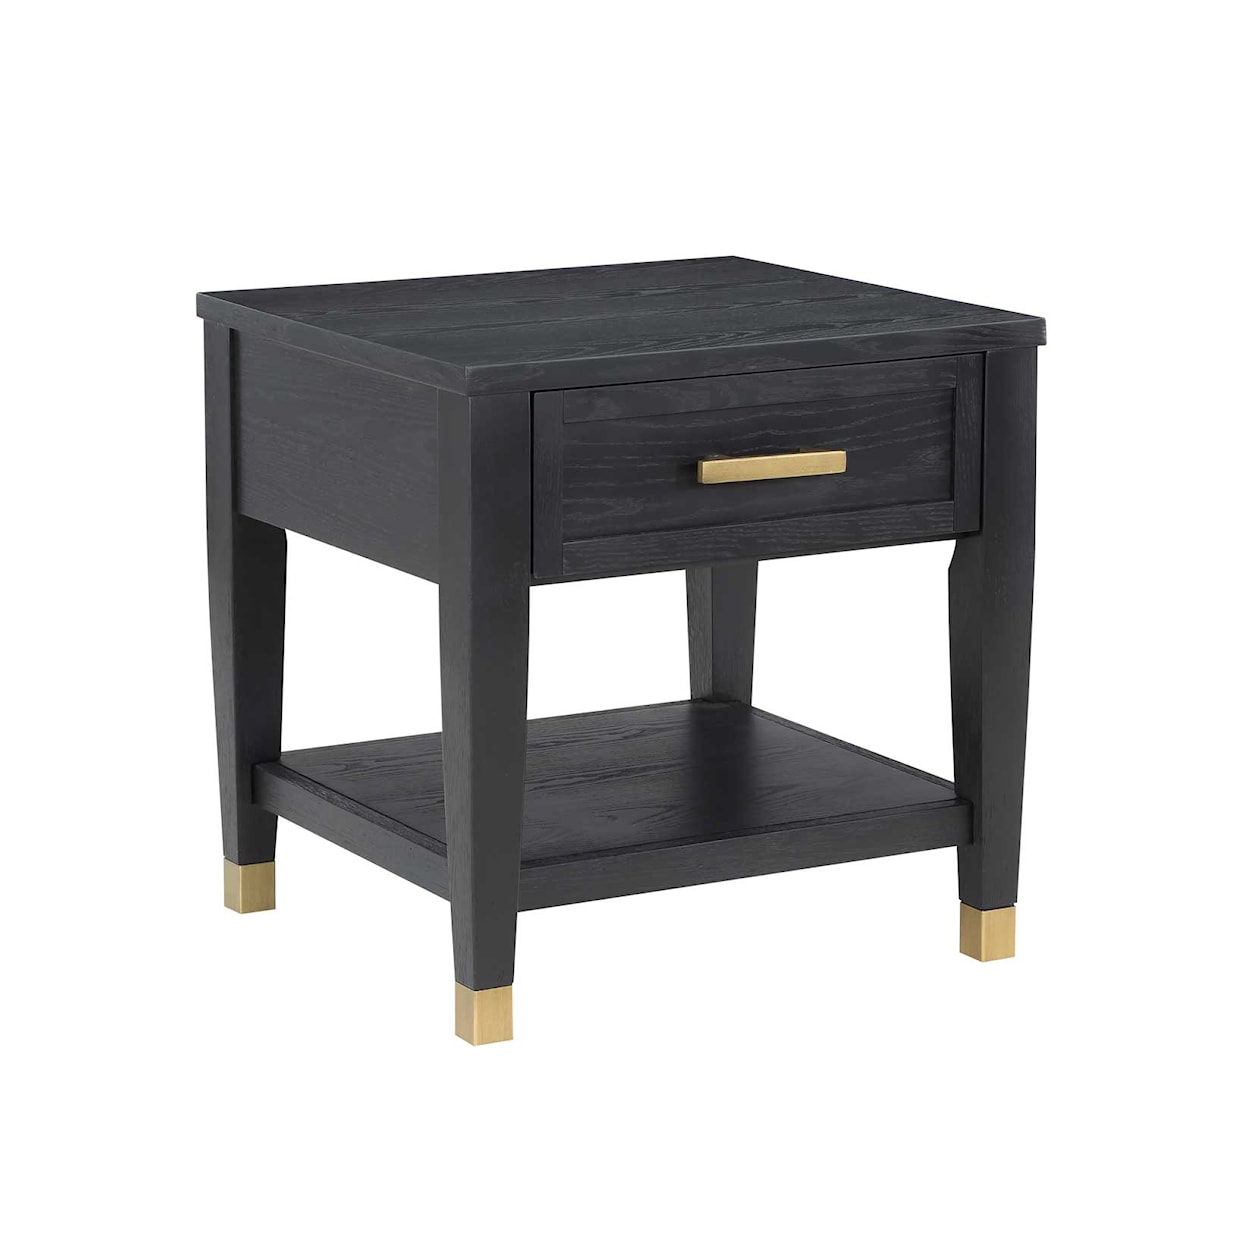 Prime Yves End Table